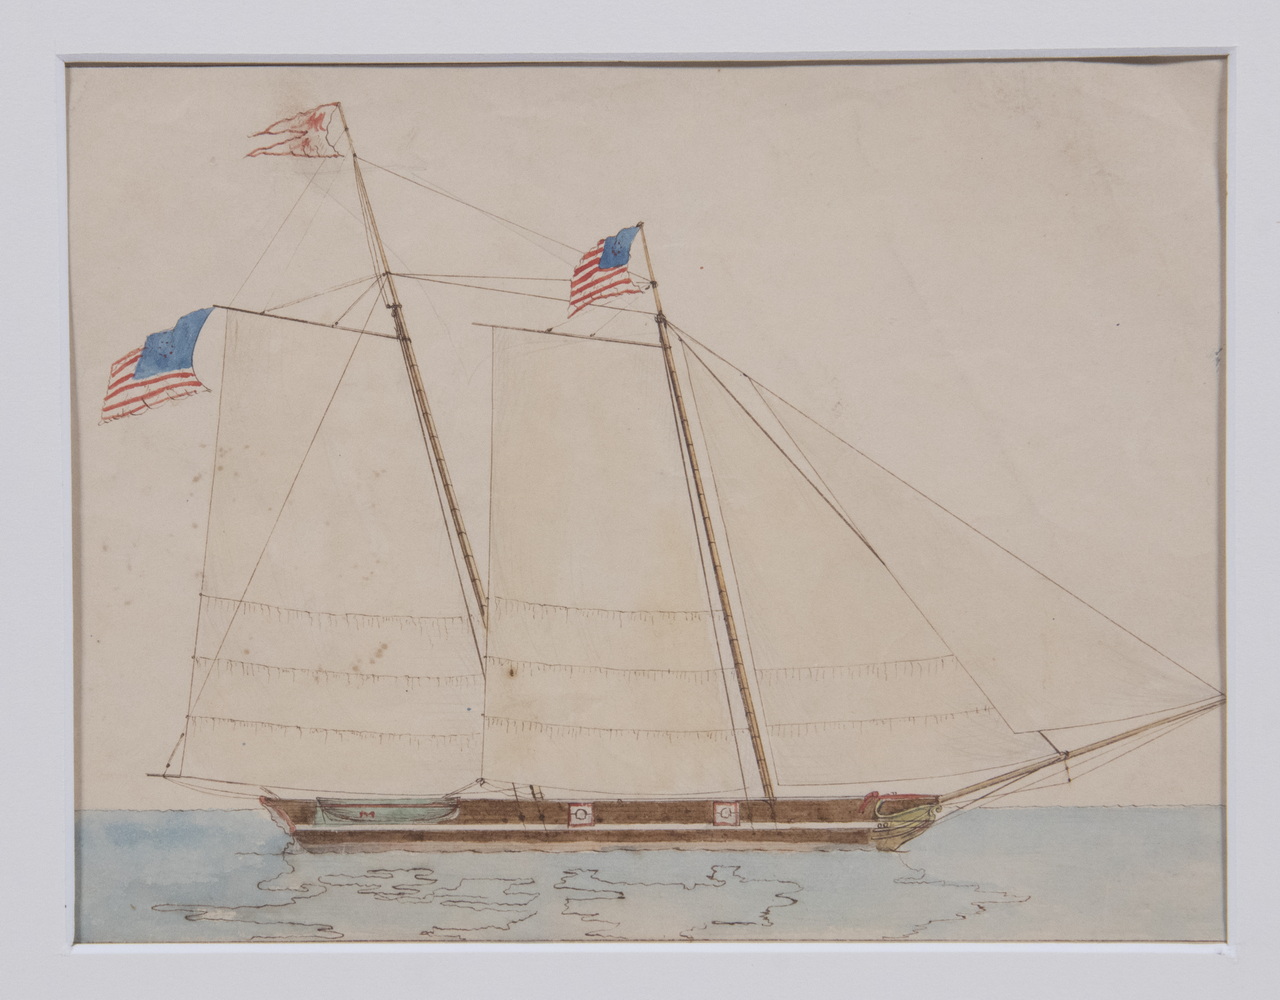 SAILOR MADE DRAWING OF A BOAT,